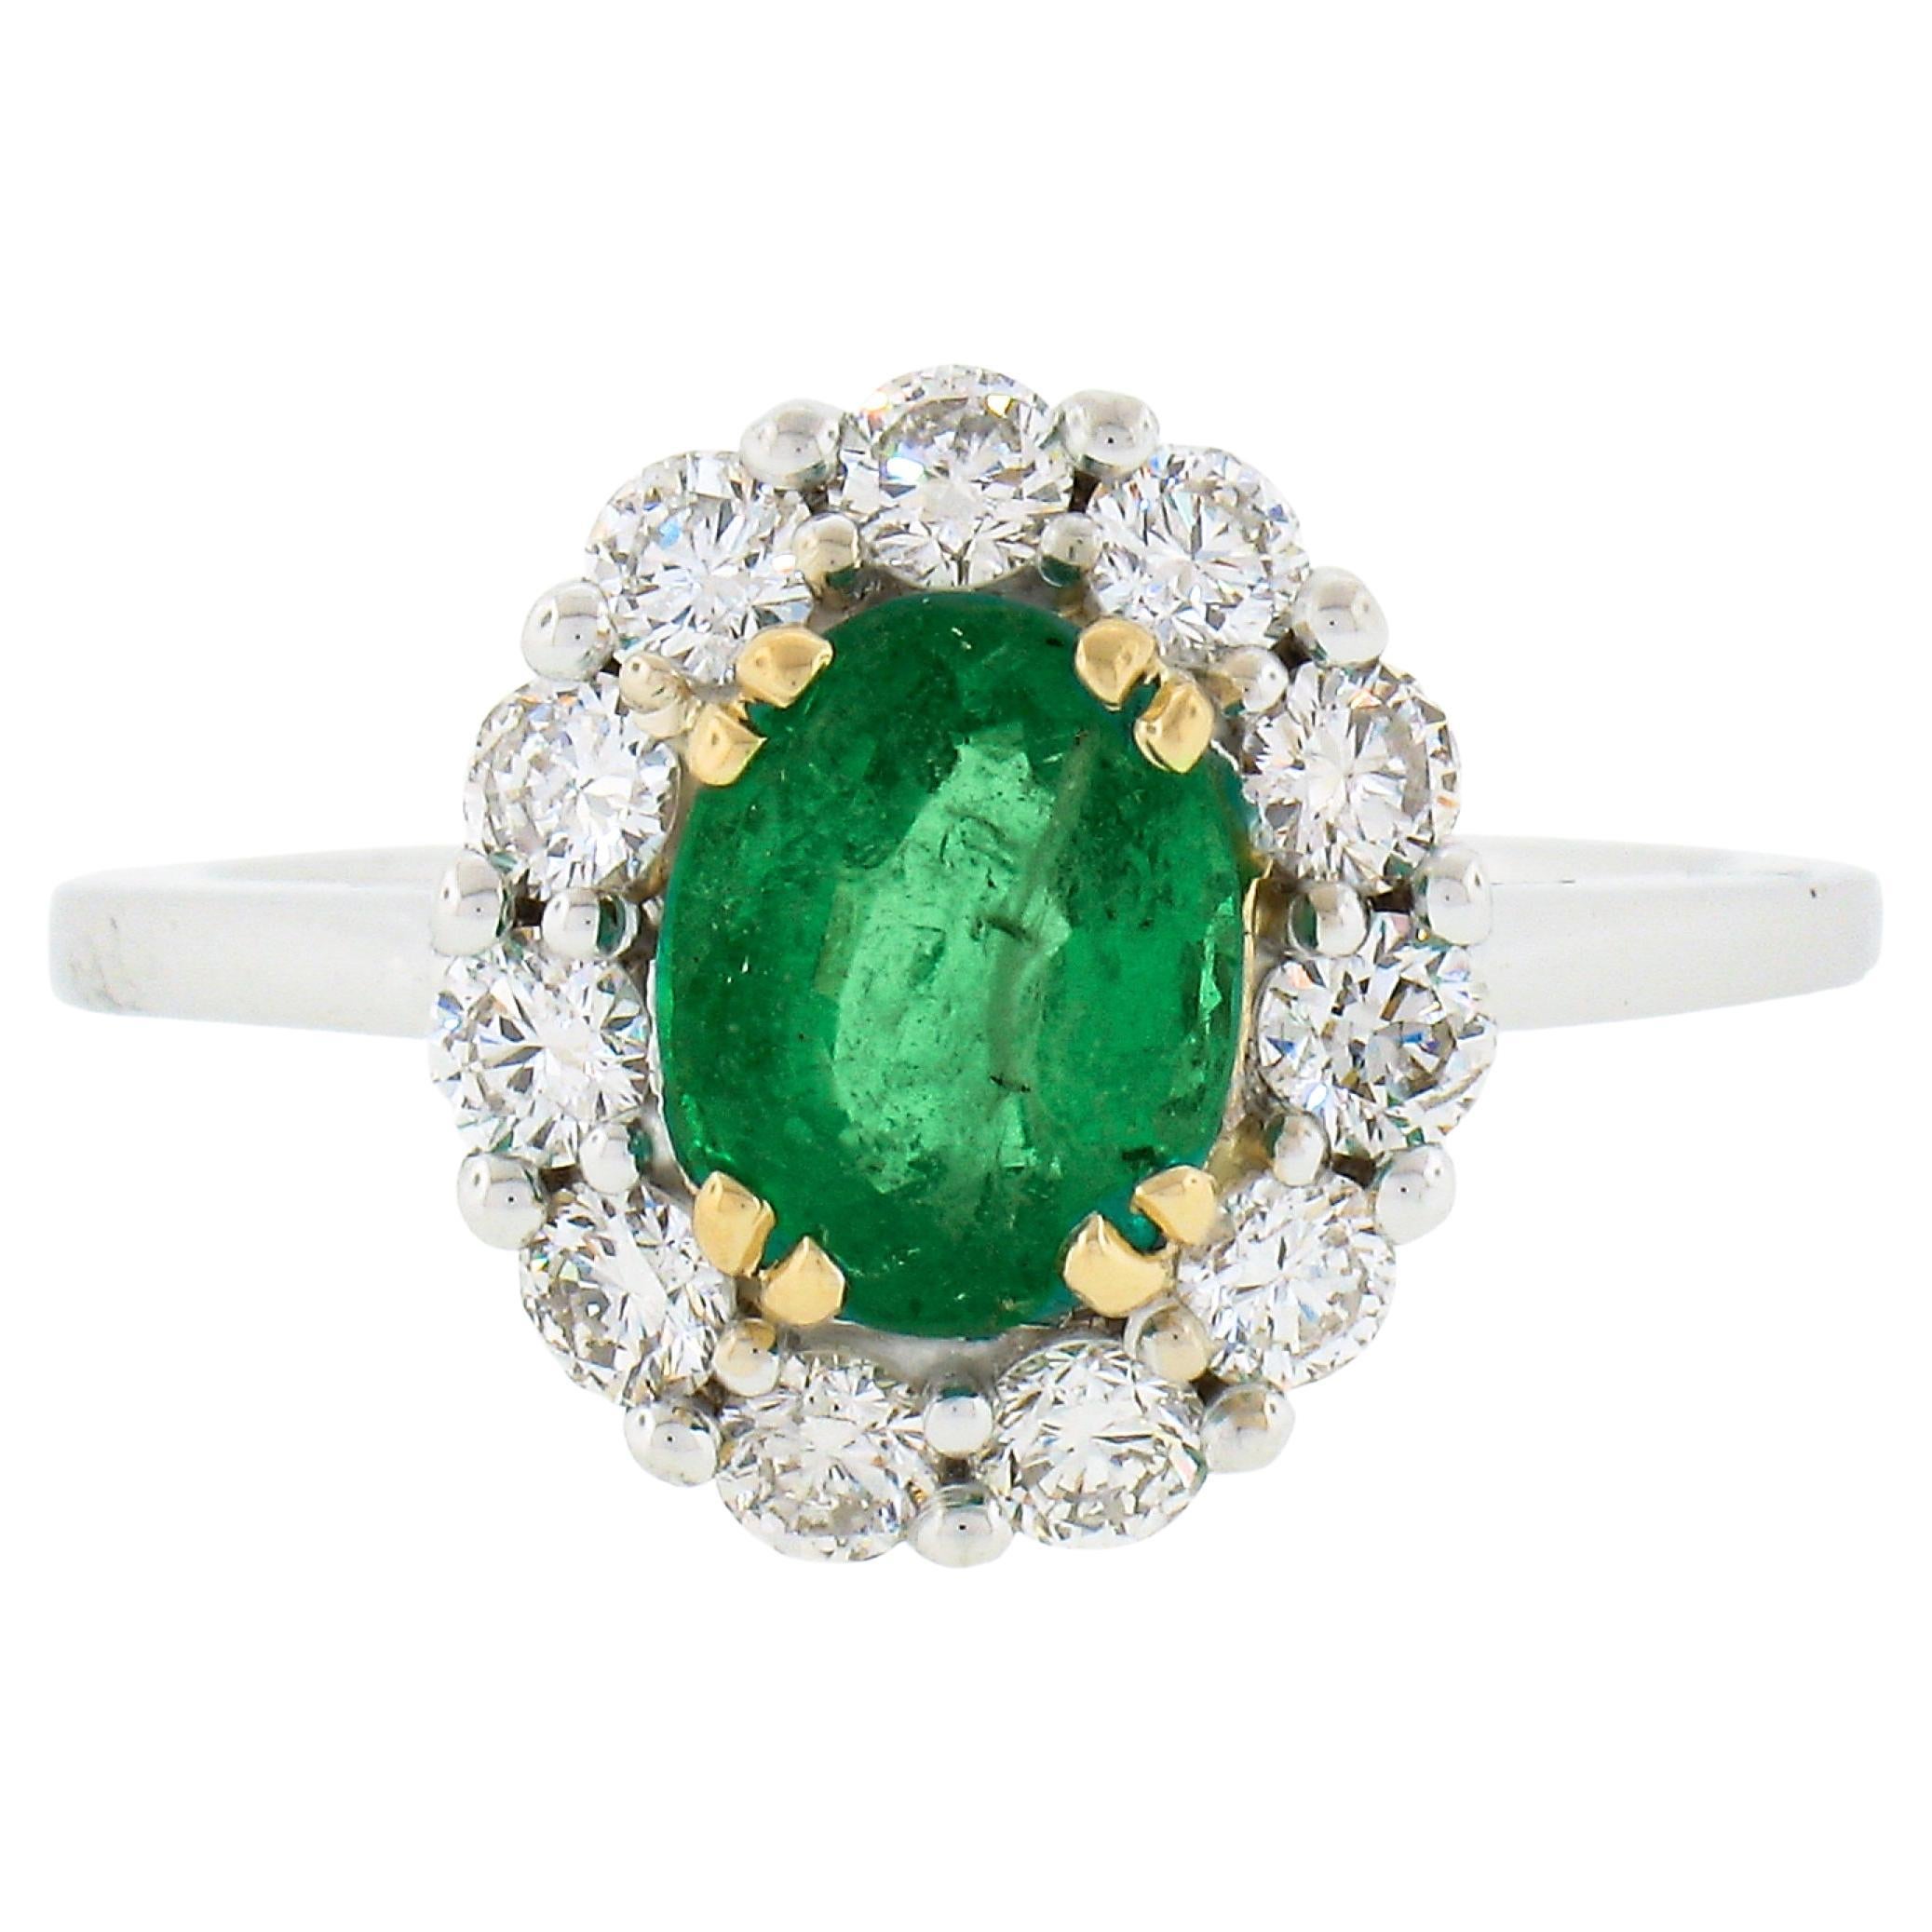 NEW Classic 18K TT Gold 2.11ct Oval Emerald Solitaire w/ Round Diamond Halo Ring